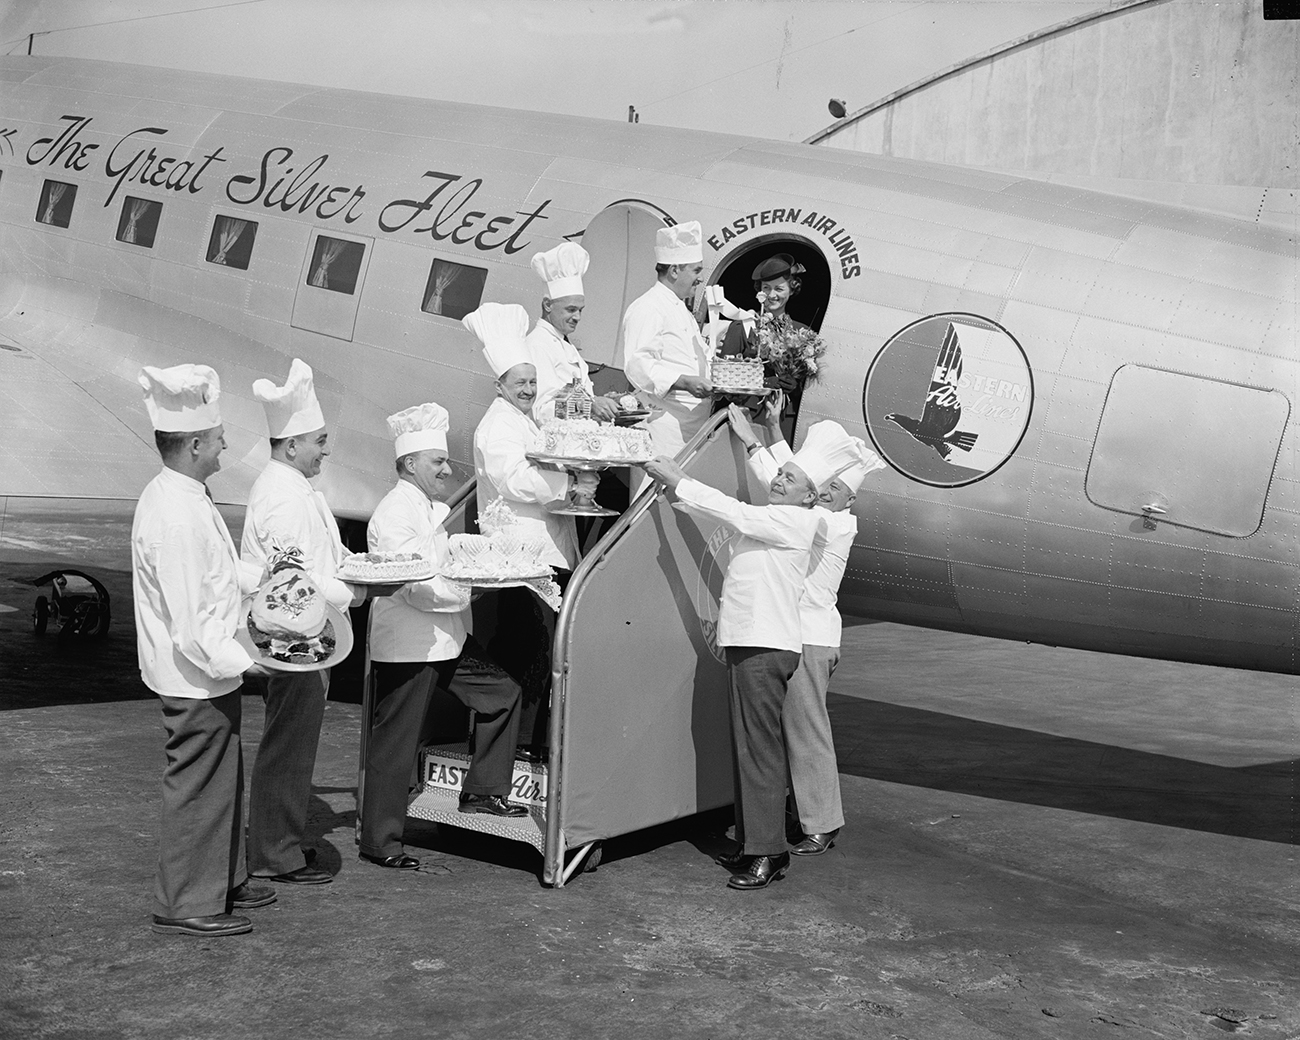 chef's load large cakes onto plane